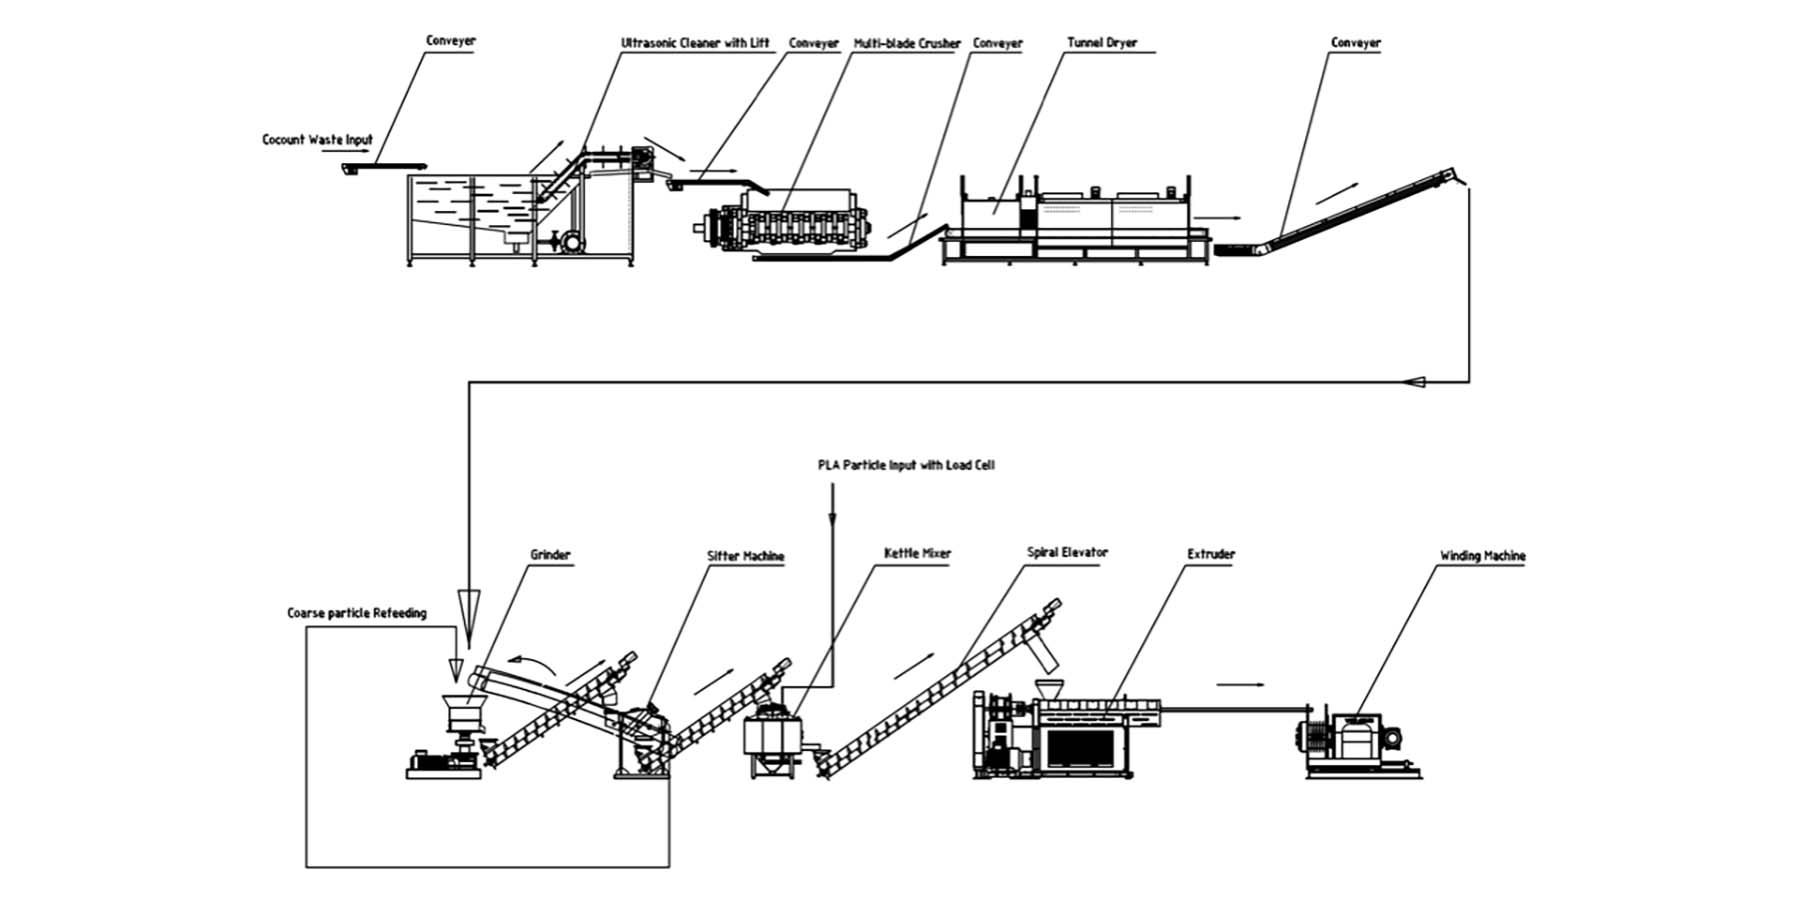 This is the process diagram of the production line